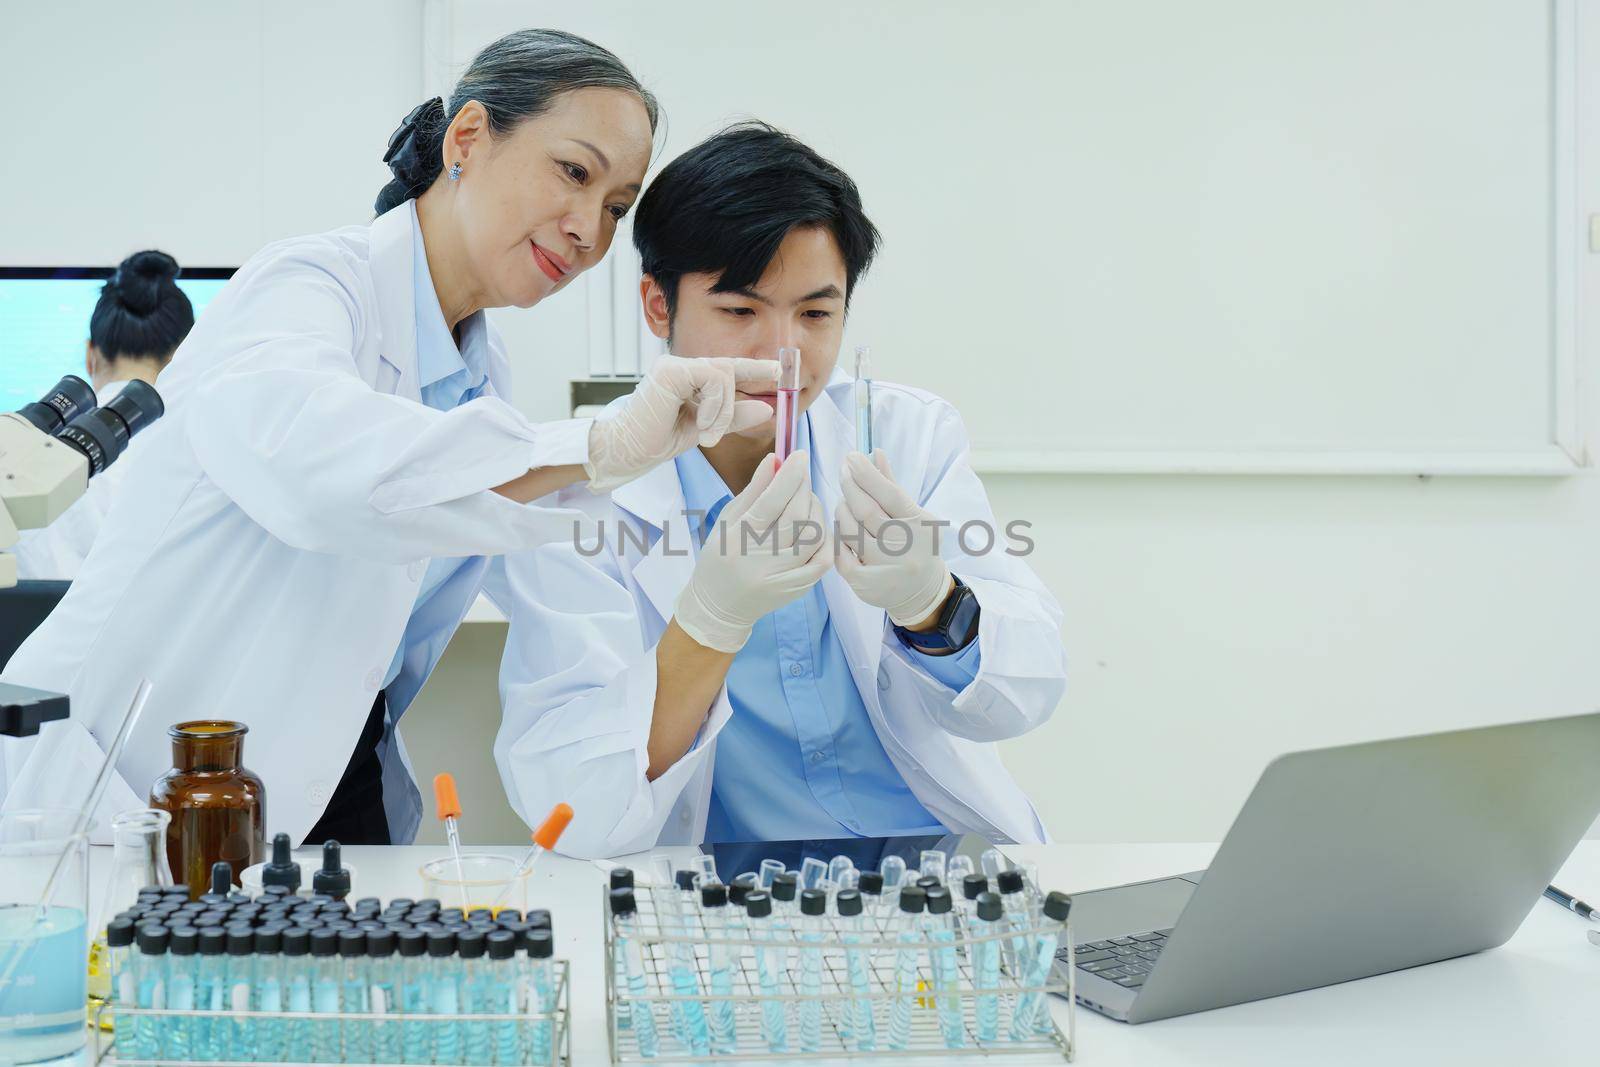 medical research laboratories, scientists Failed research chemical samples Discuss technological innovations. Advanced scientific laboratories for medicine, biotechnology